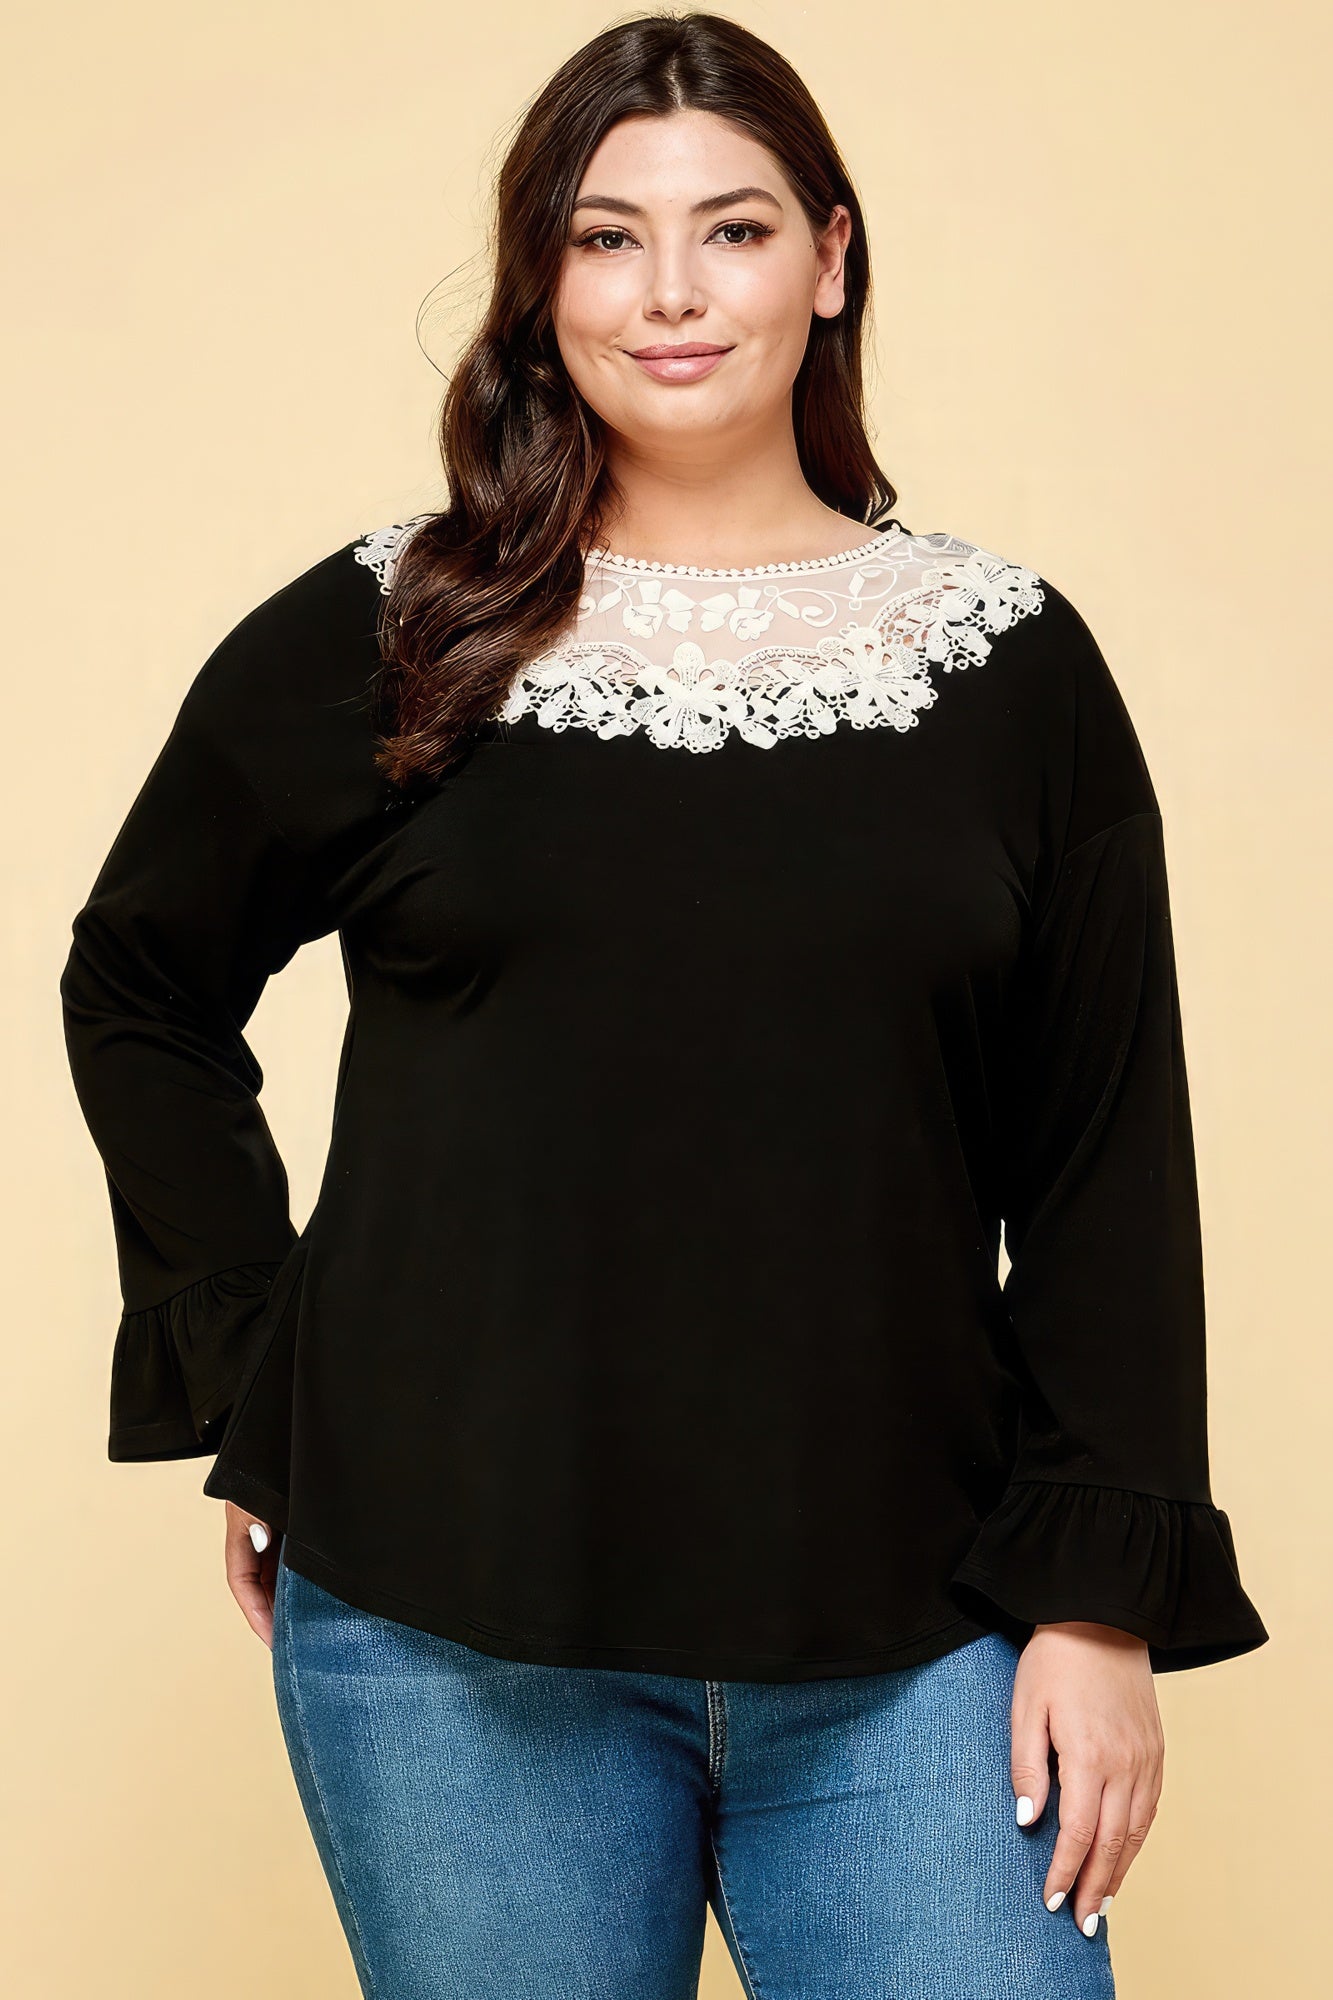 Detailed Lace Neckline Long Sleeve Top